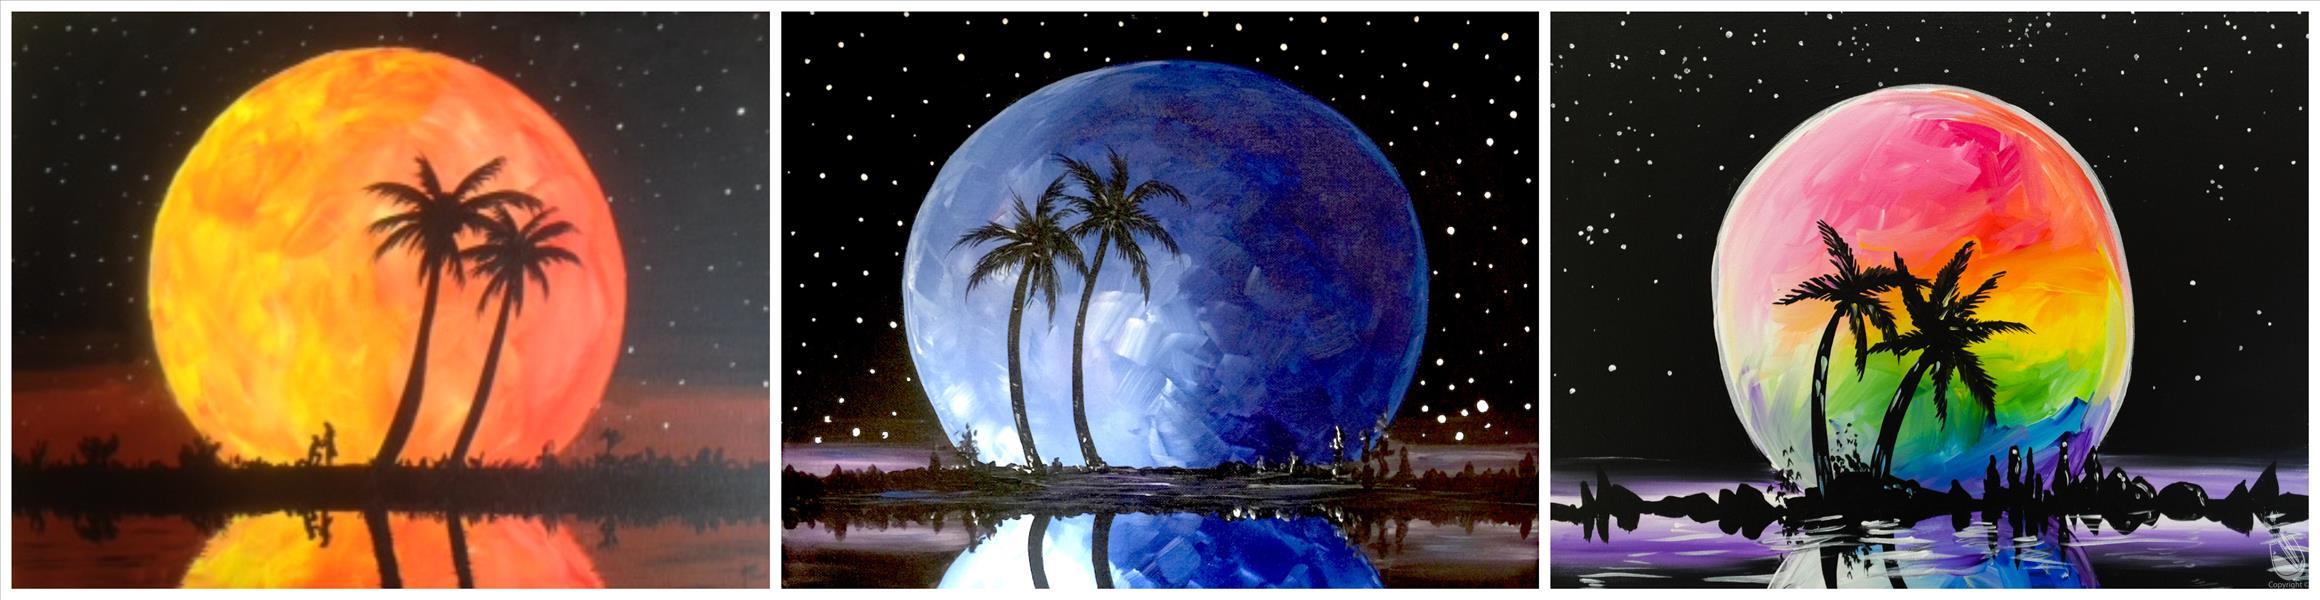 BFF, DATE NIGHT -  Pick your Florida Moon - Set